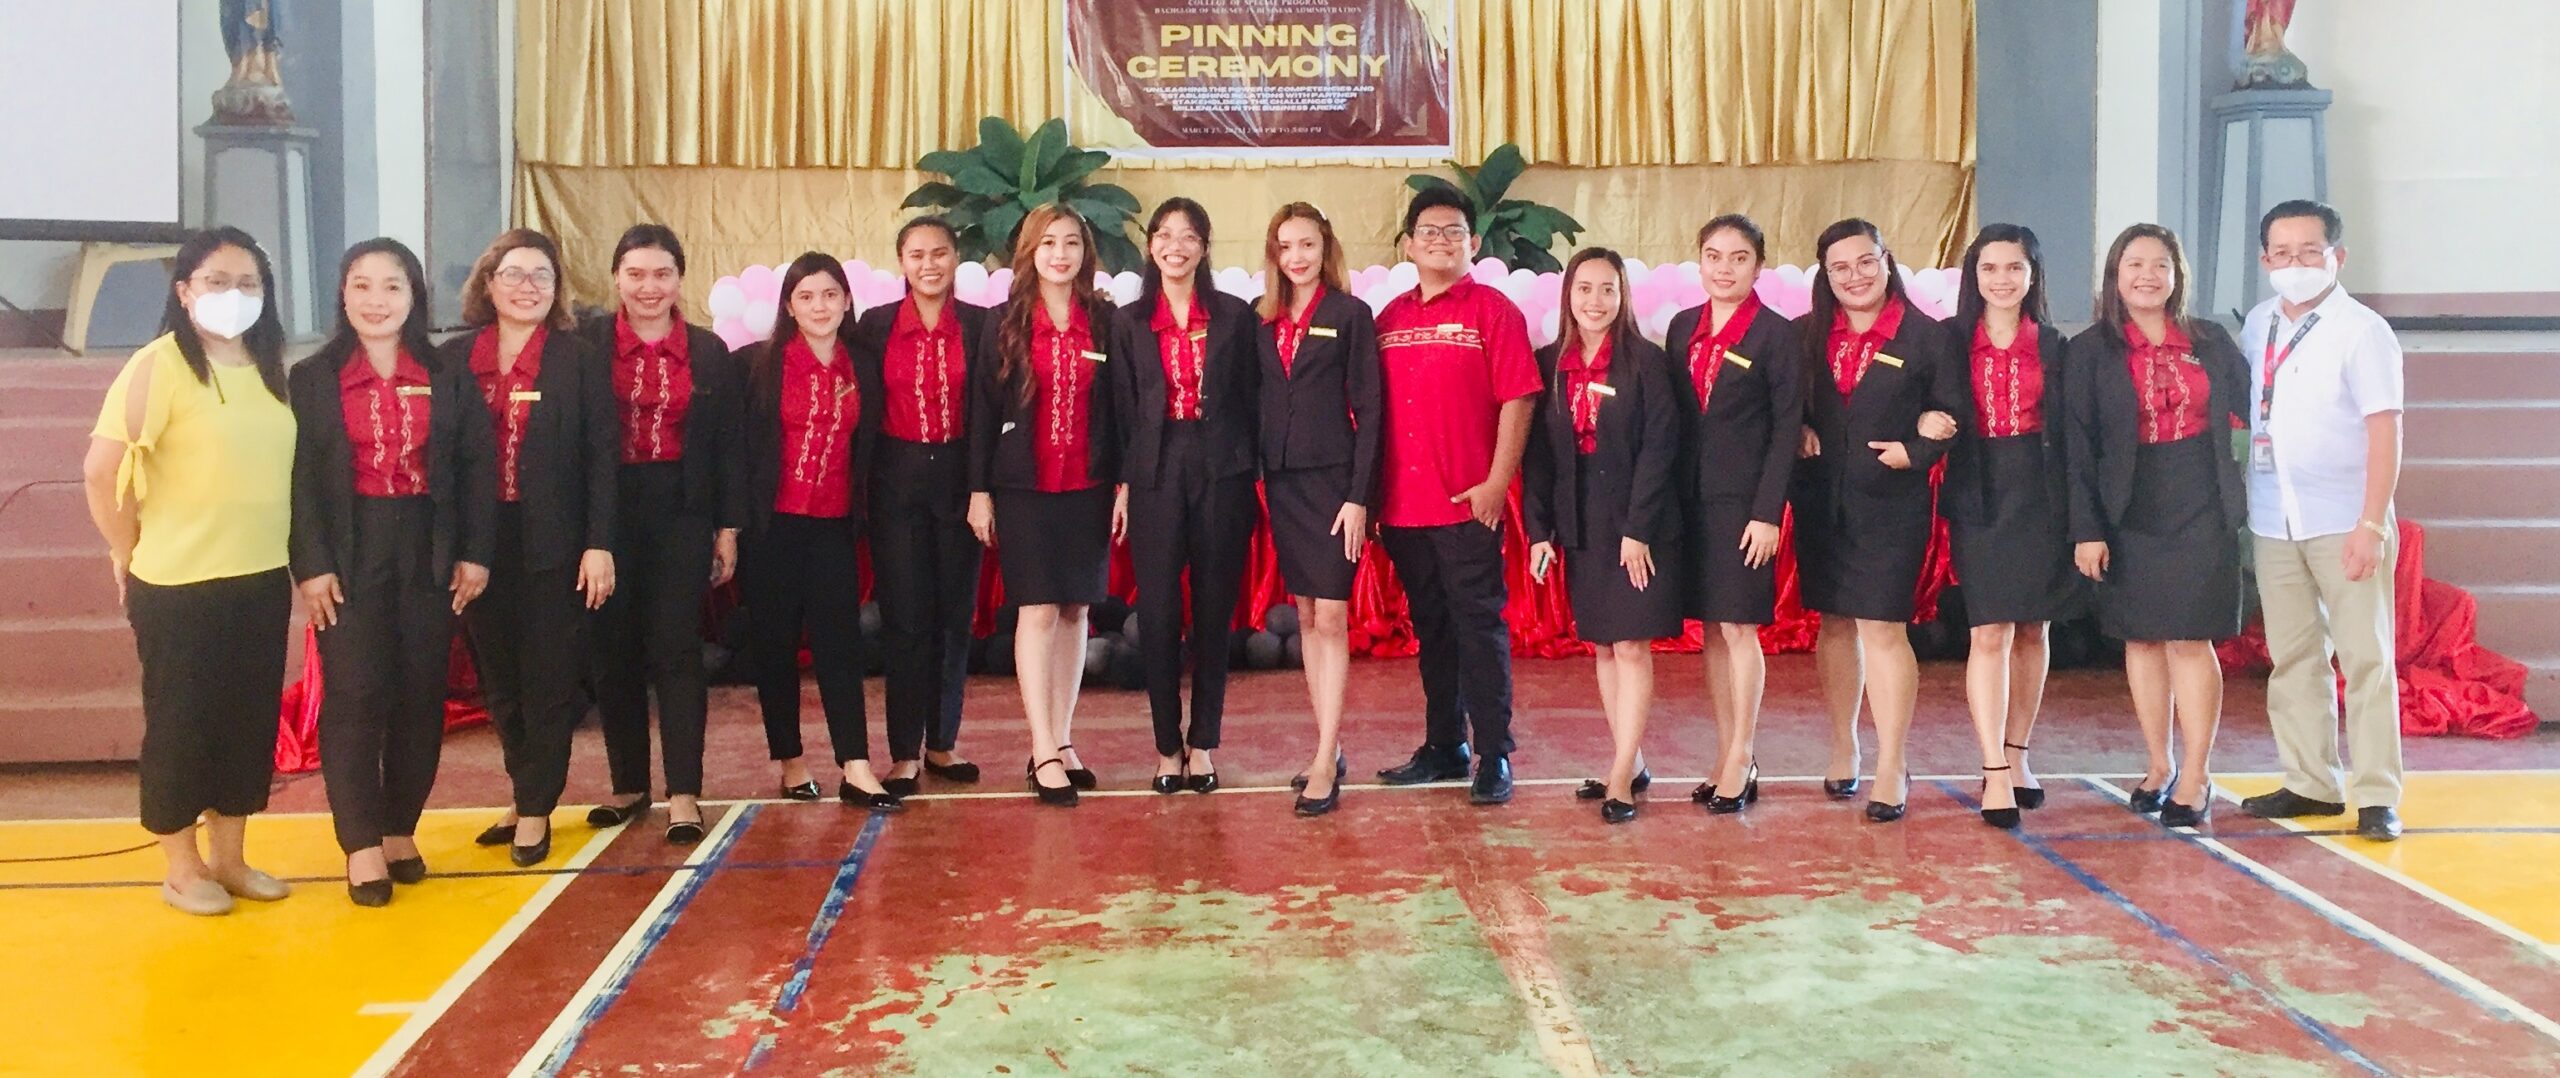 Pinning Ceremony: Marks the Milestone of the CJC-CSP BSBA Program